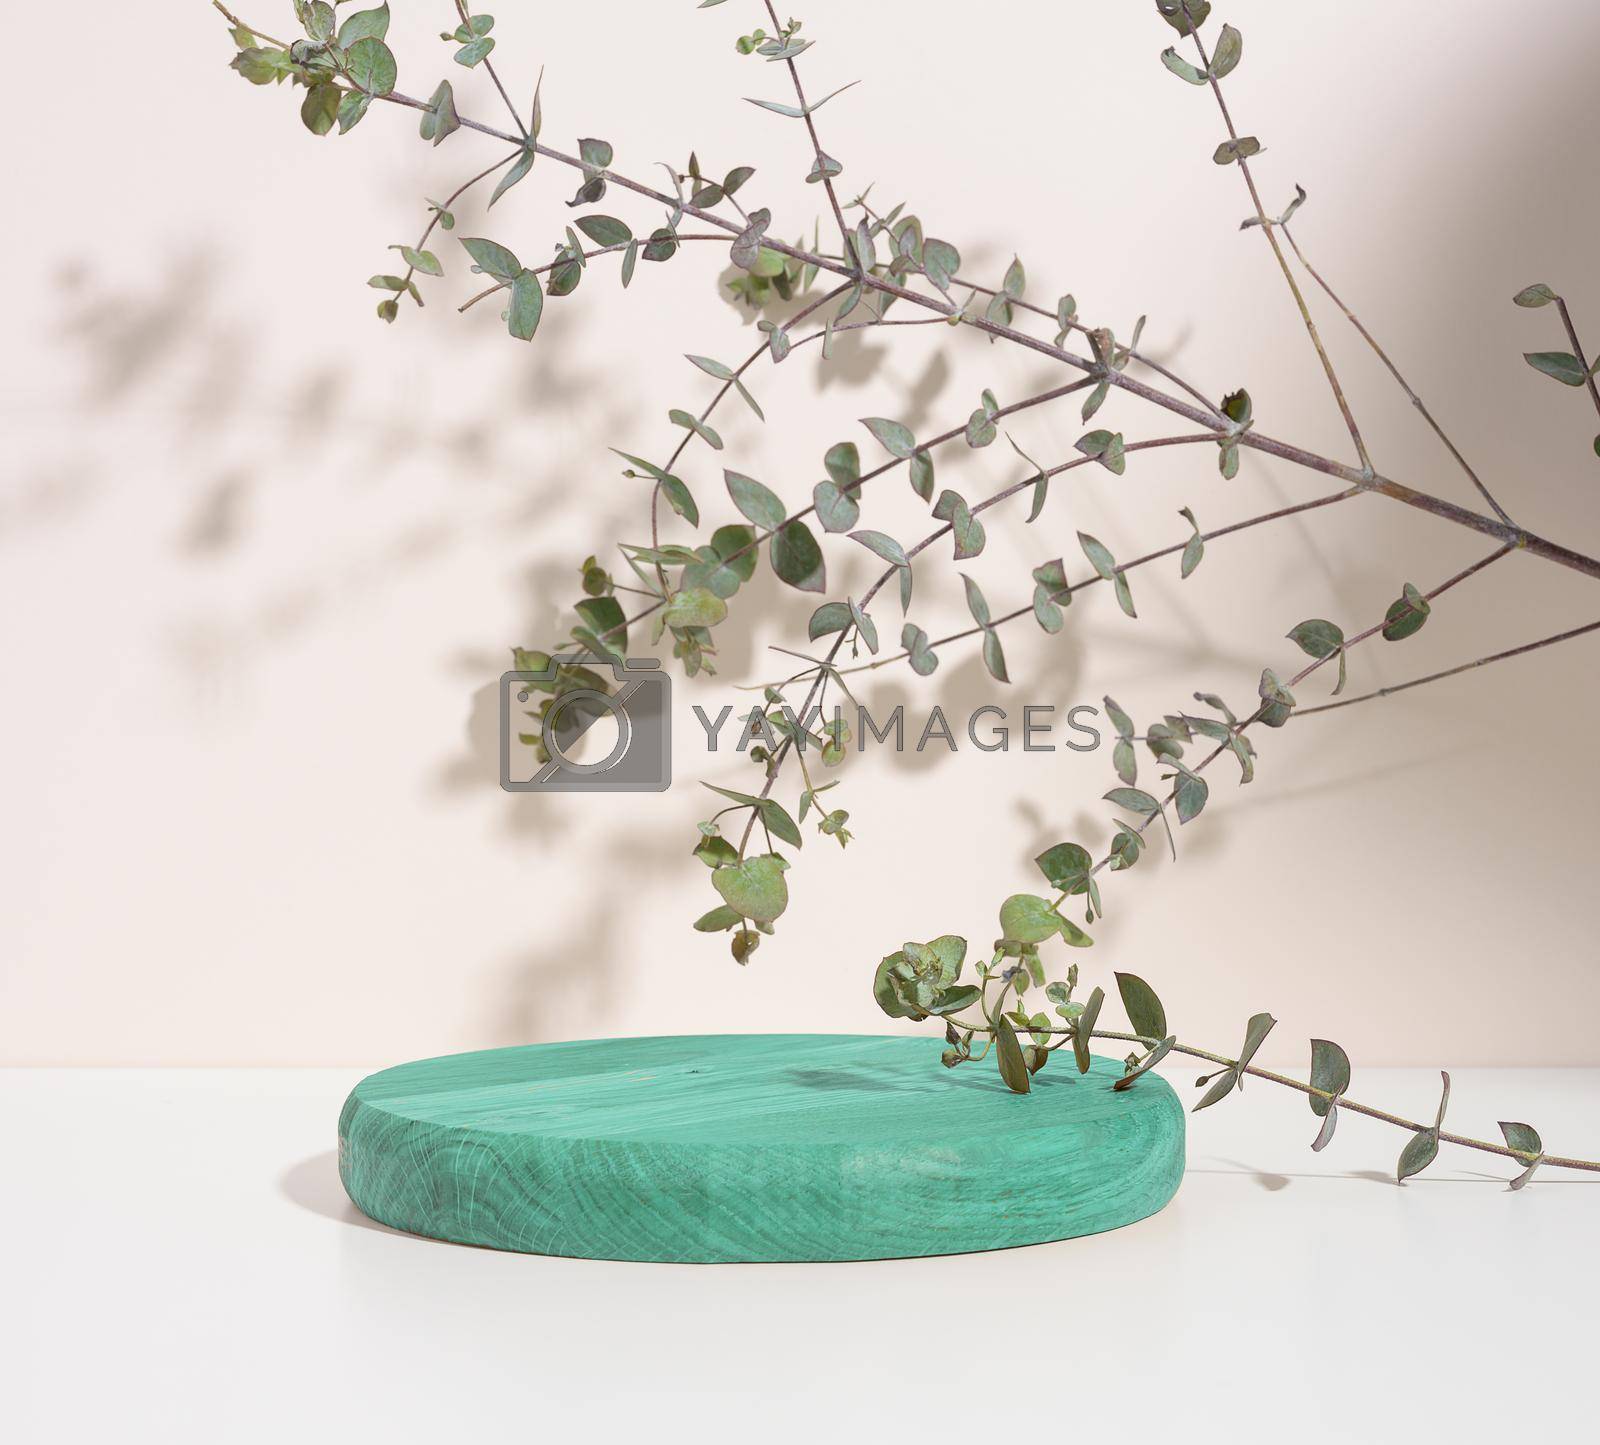 Royalty free image of Round green wooden platform and eucalyptus branch on a beige background.  by ndanko